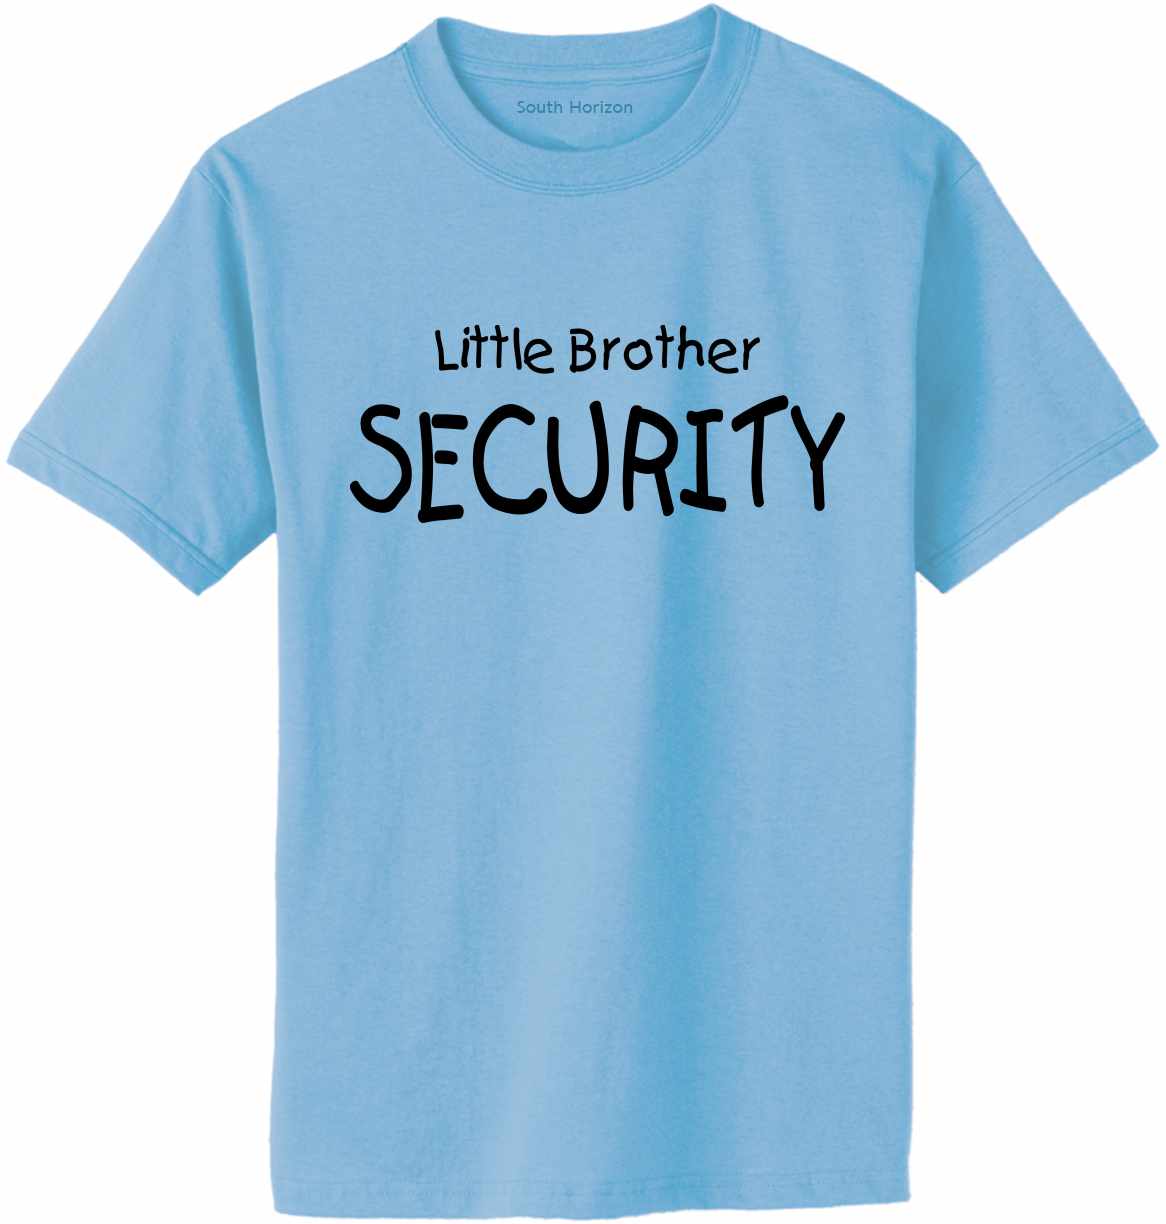 Little Brother Security Adult T-Shirt (#972-1)